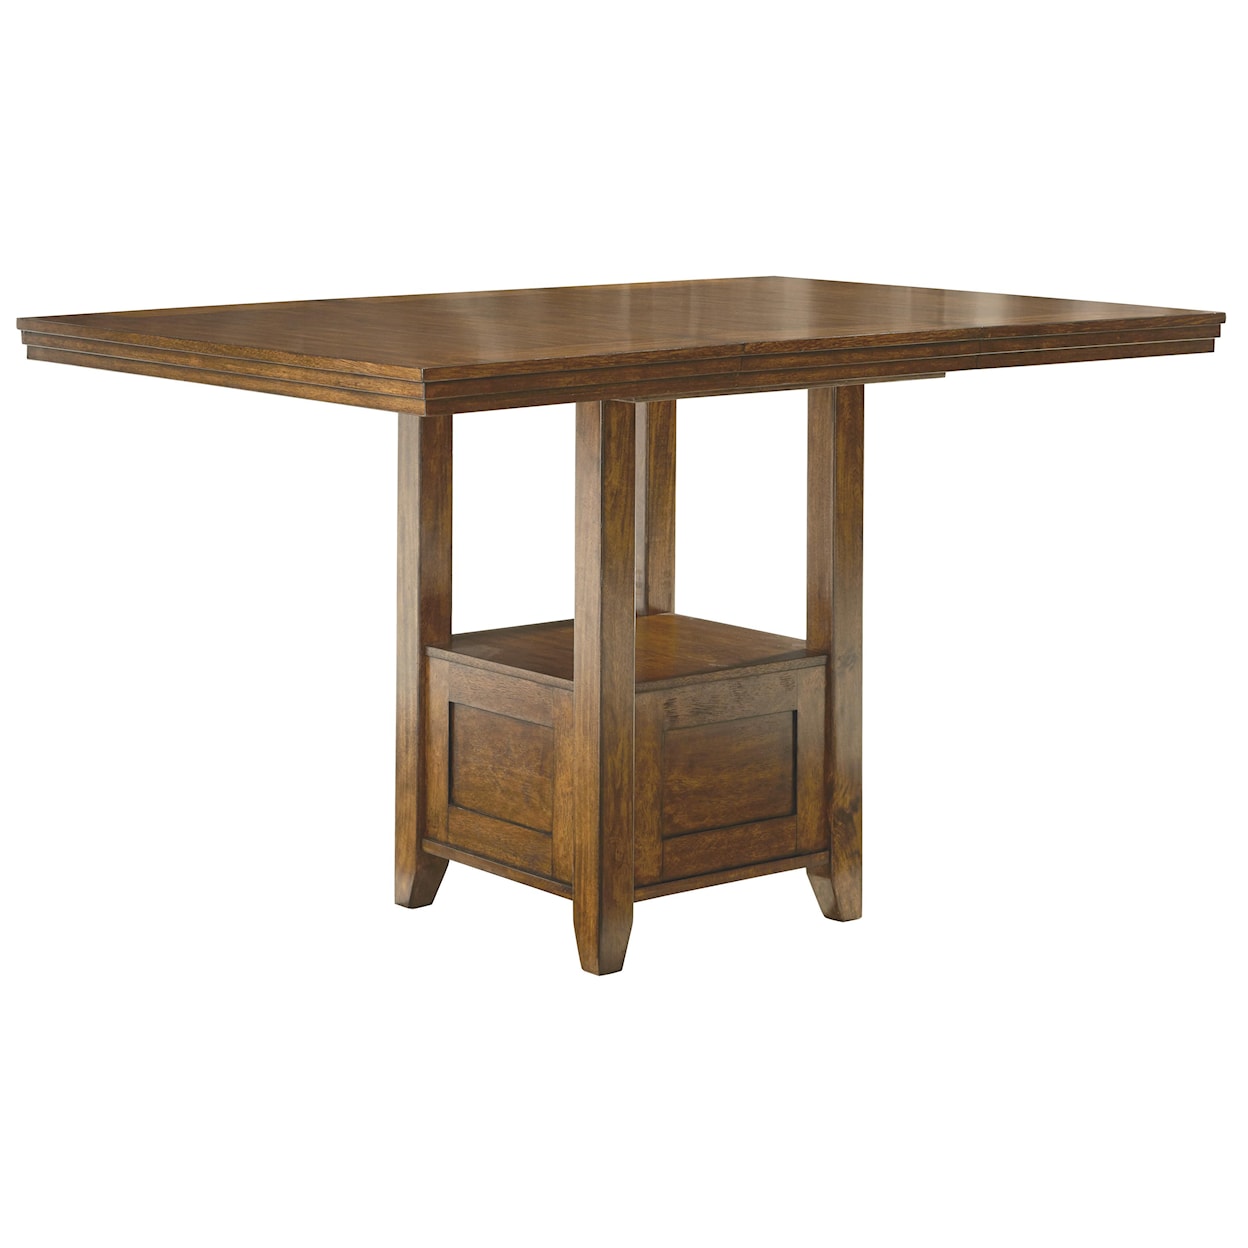 Benchcraft Ralene Rectangular Dining Room Counter EXT Table